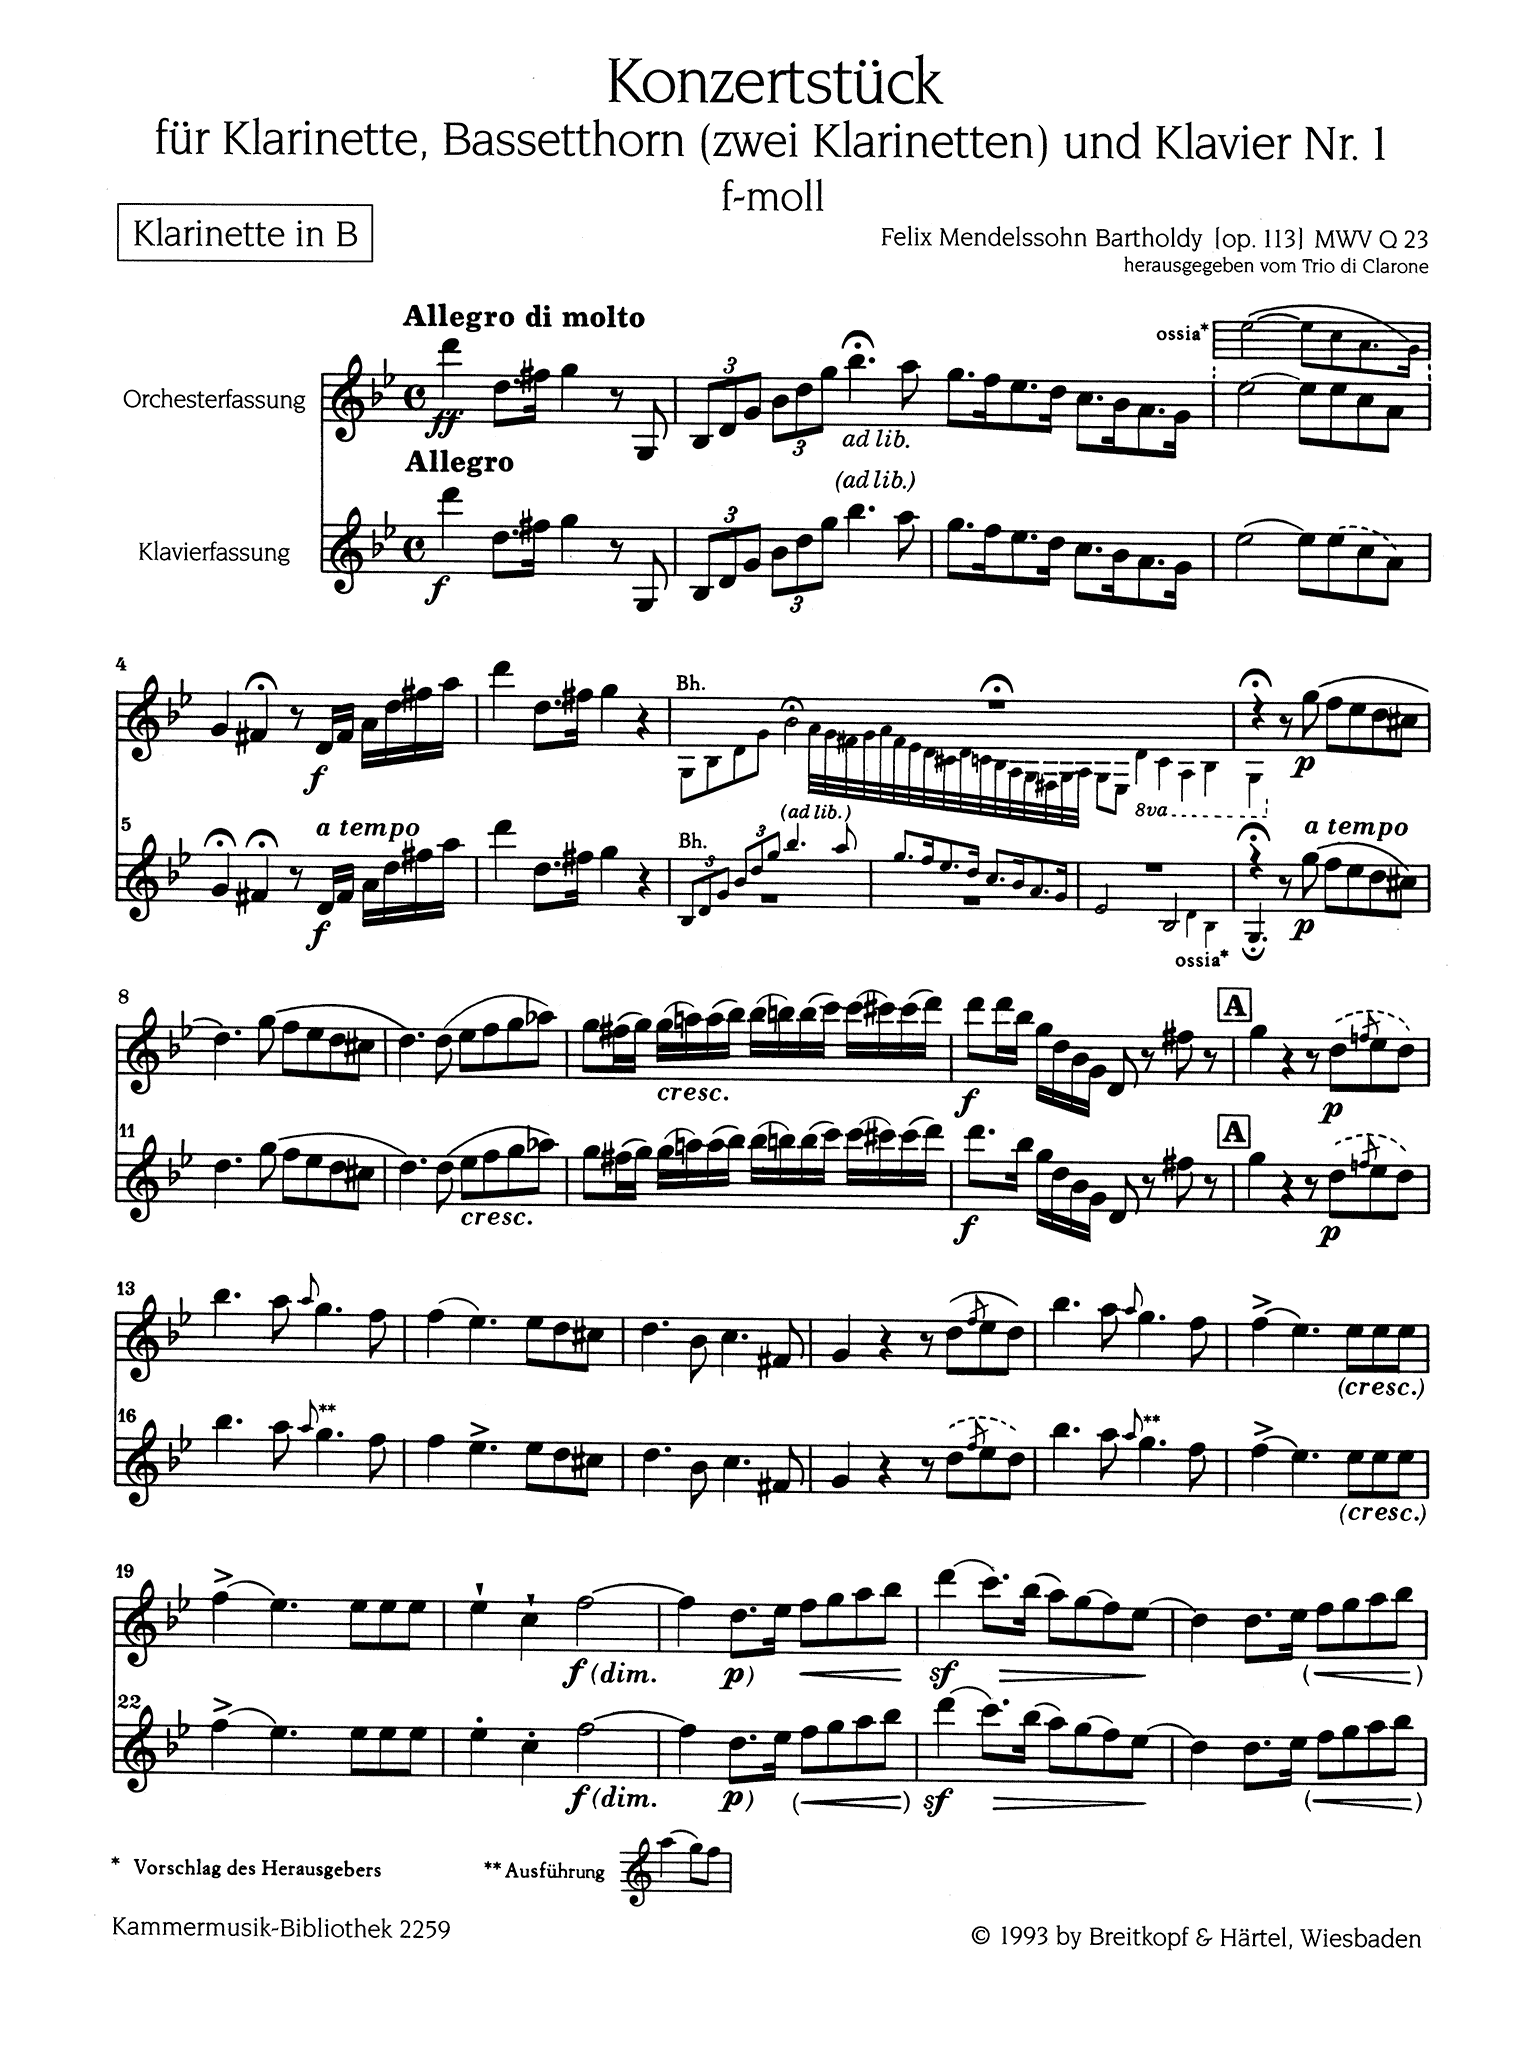 Concertpiece No. 1 in F Minor, Op. 113 First Clarinet solo part